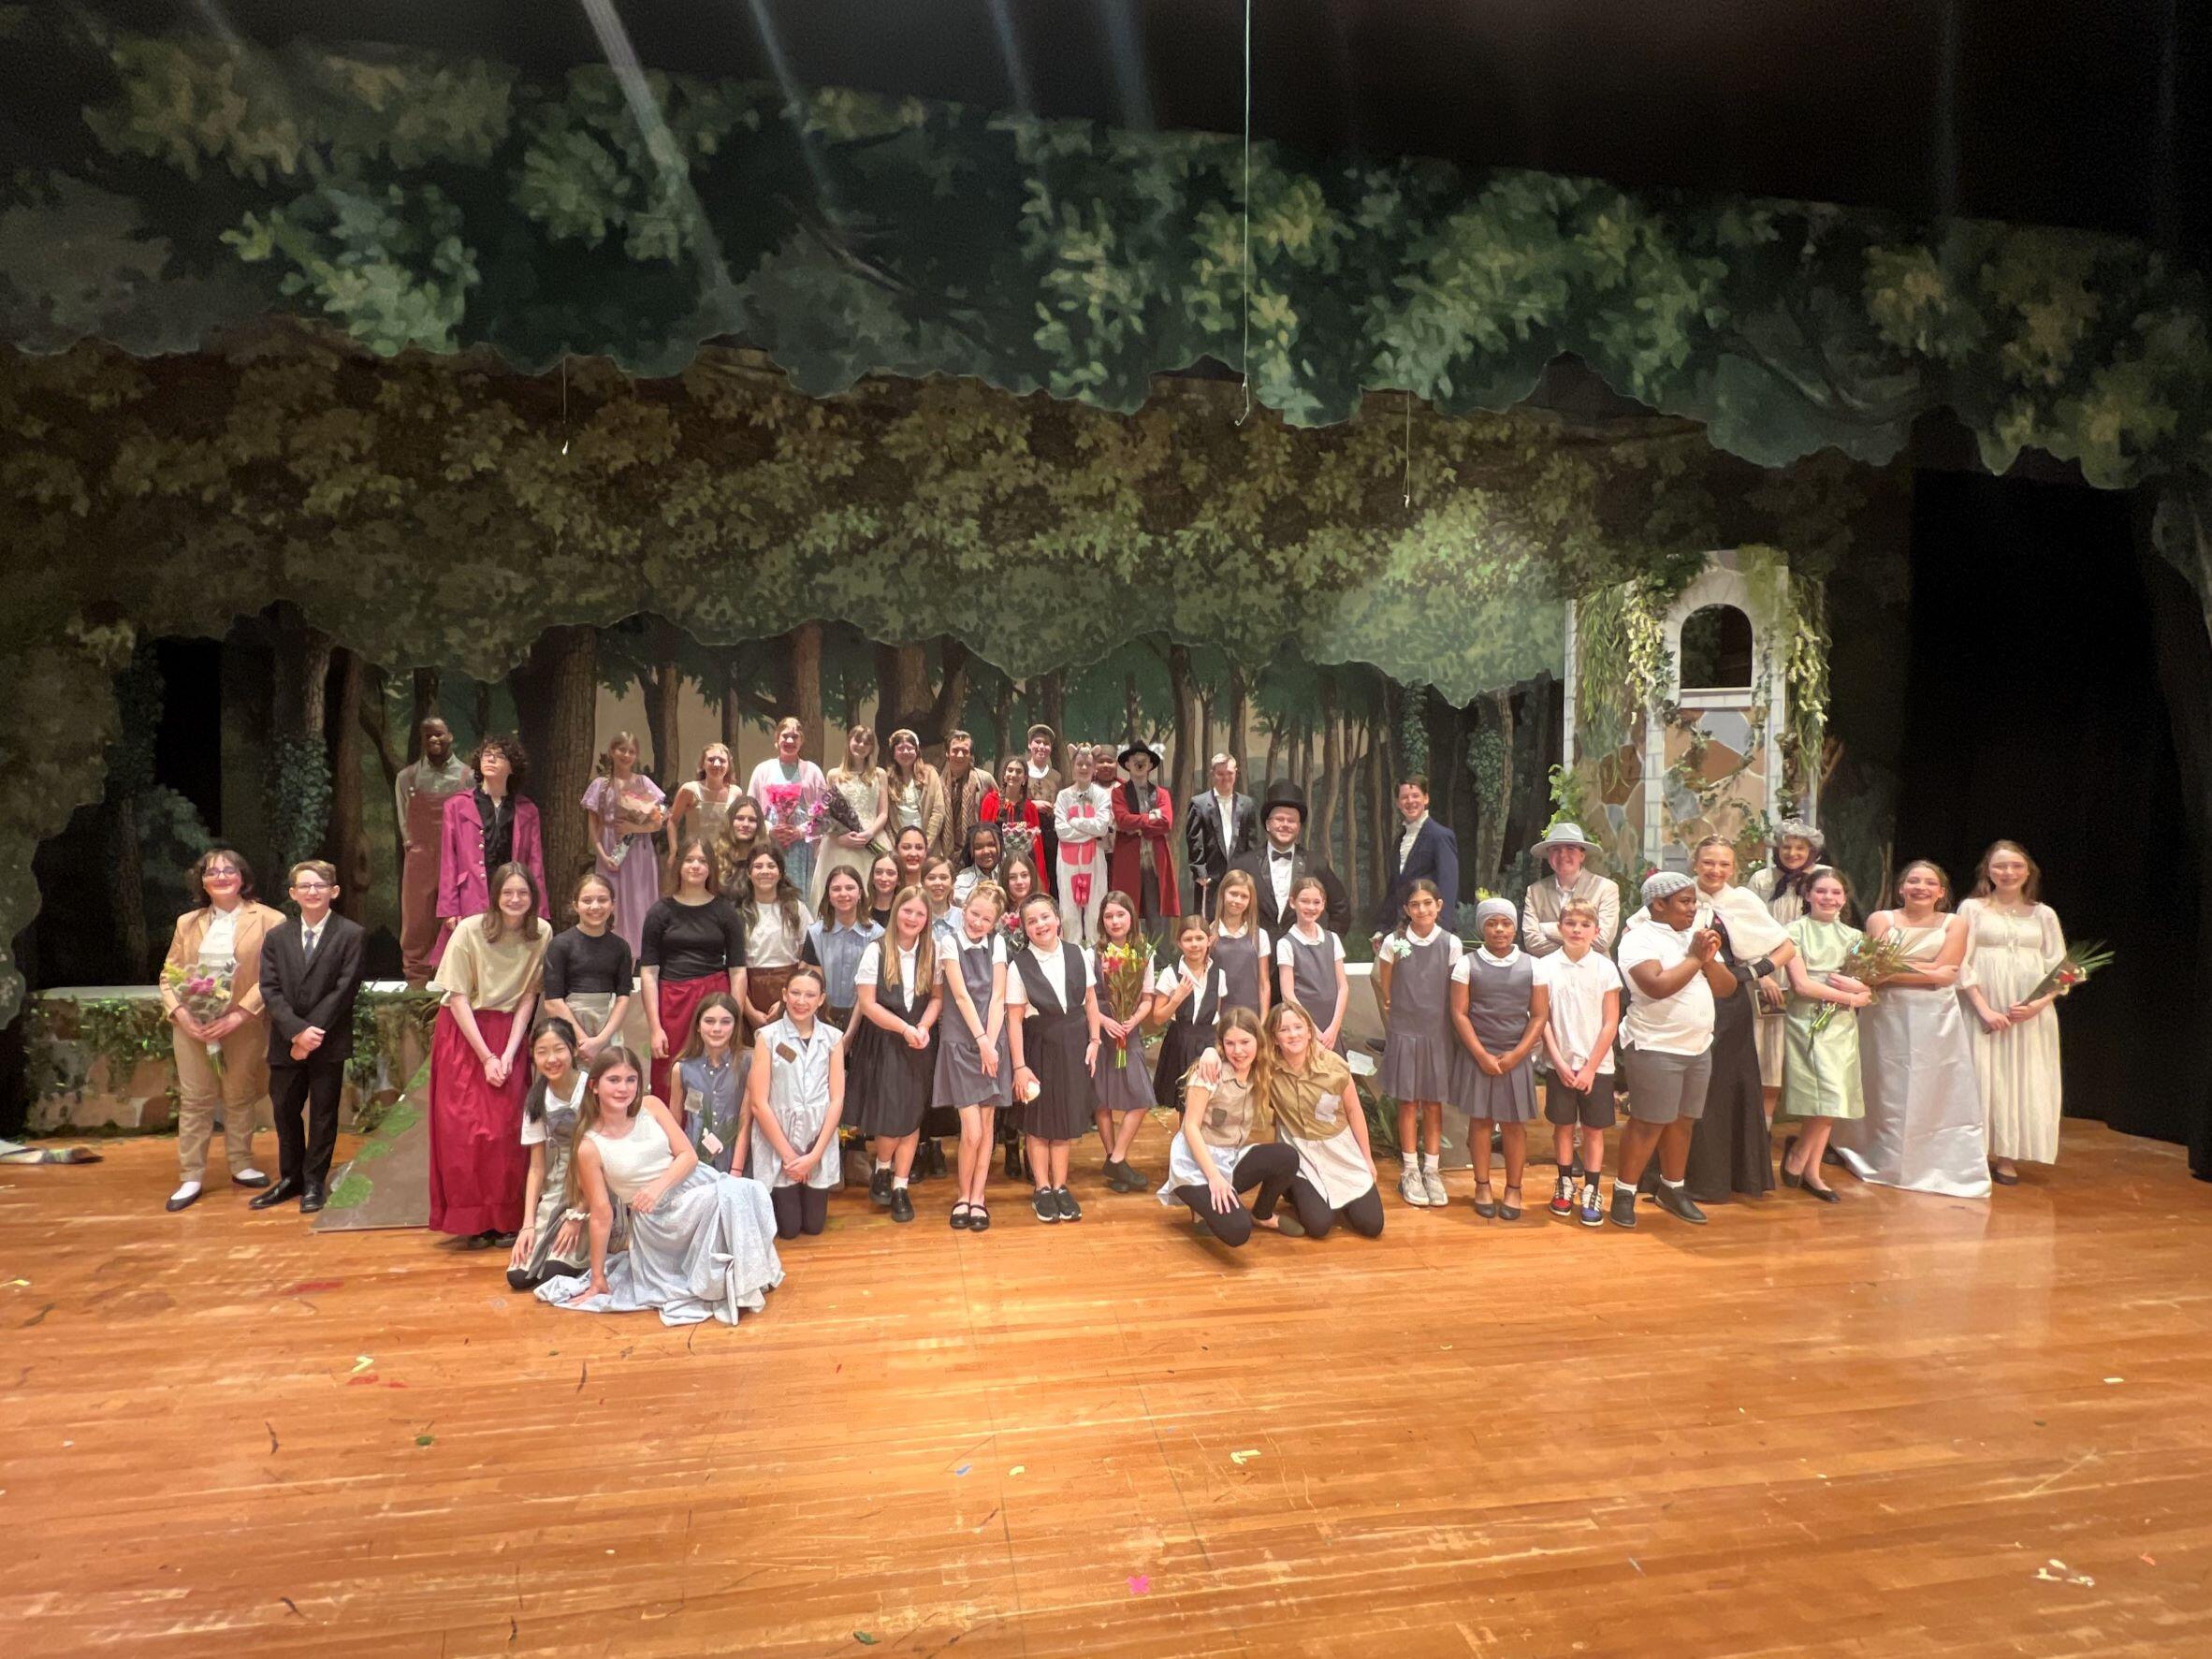 MS- Entire cast of Into the Woods posing for a group photo